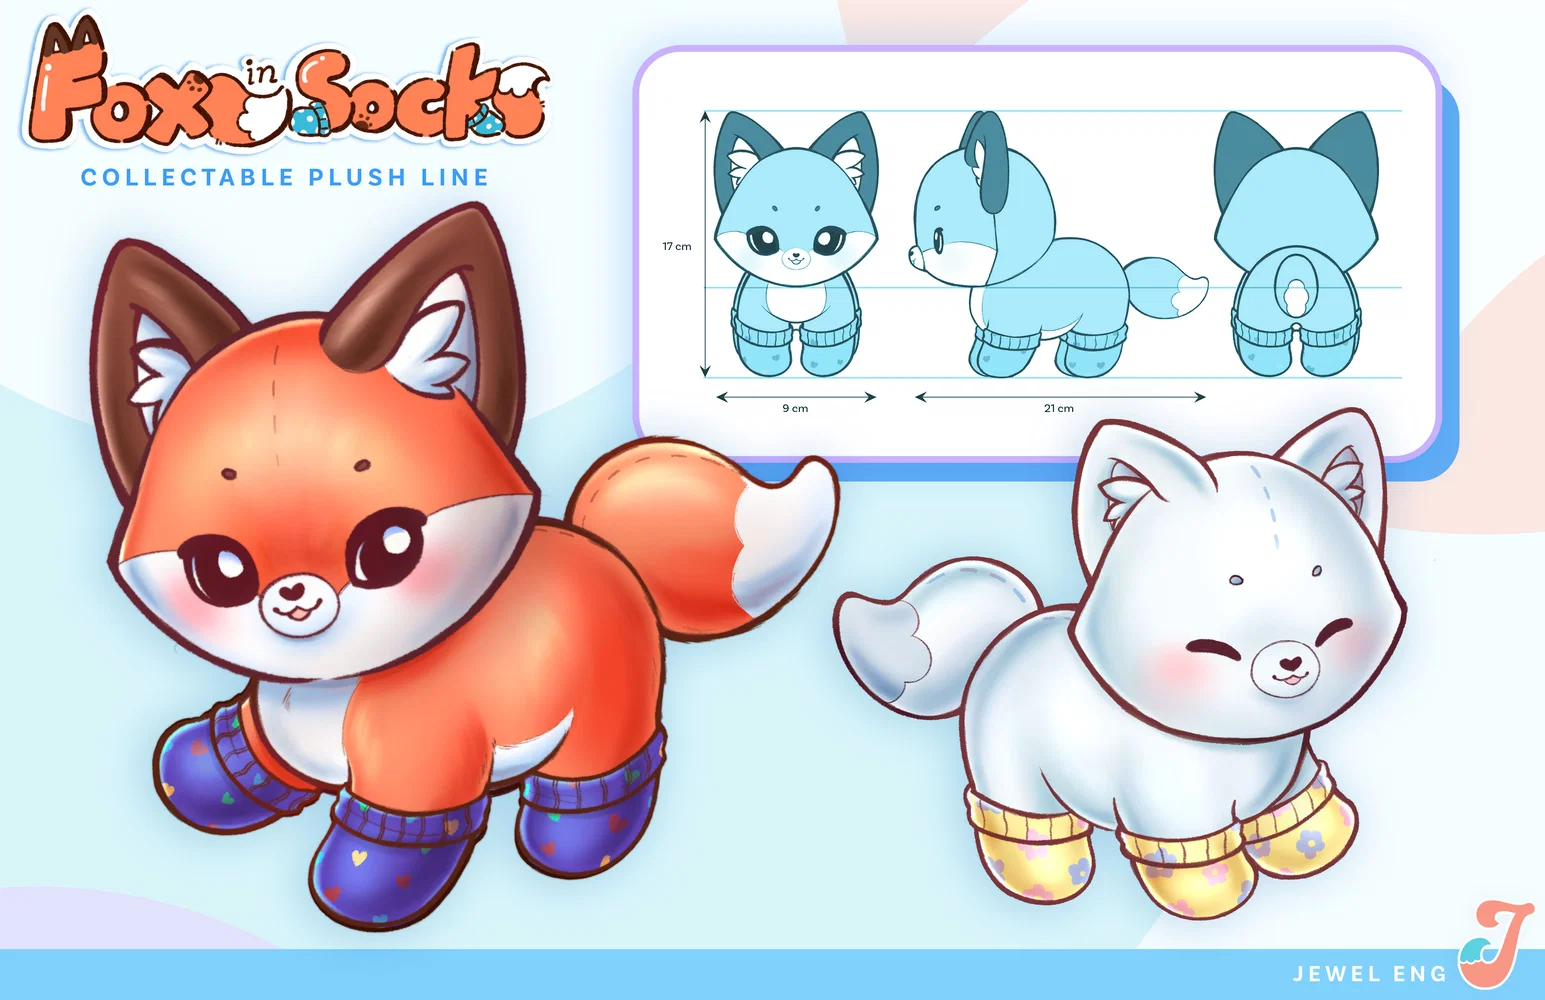 A portfolio page for the plush line Fox In Socks, depicting a red fox and an artic fox wearing cute patterned socks. At the corner, there are turnarounds of the plush fox. 